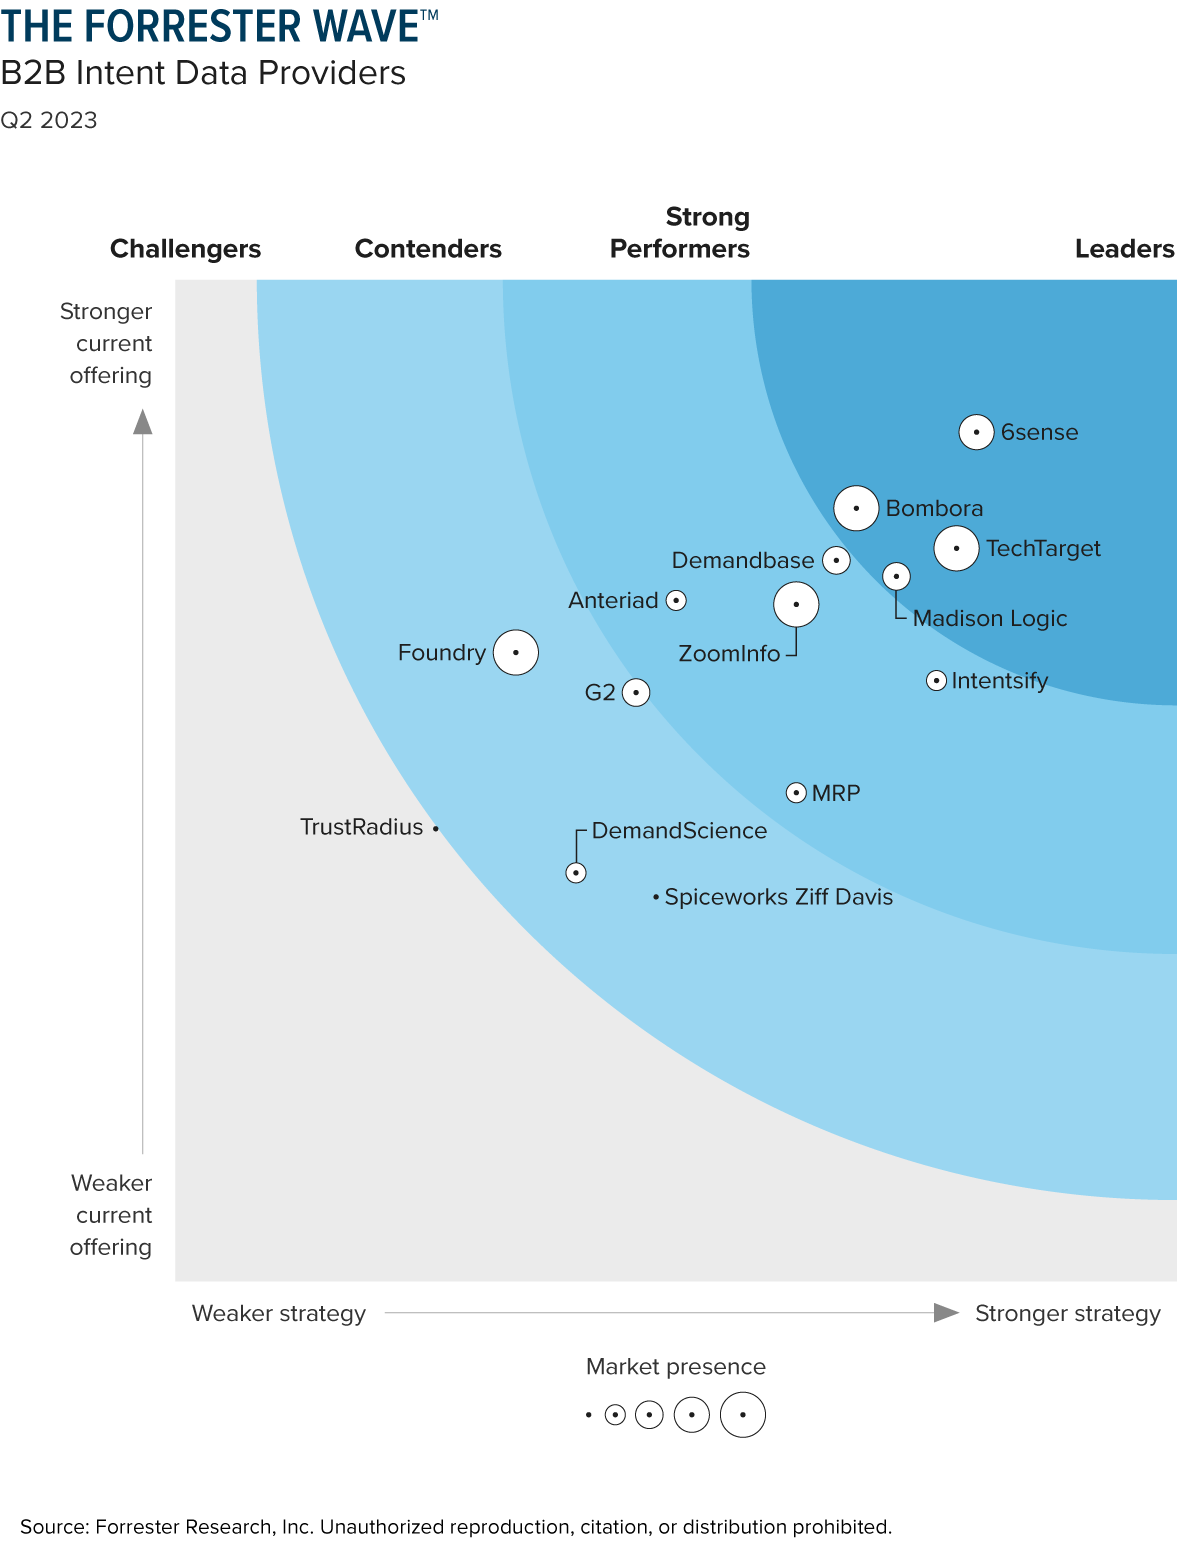 6sense Named a Leader in The Forrester Wave™: B2B Intent Data Providers, Q2 2023